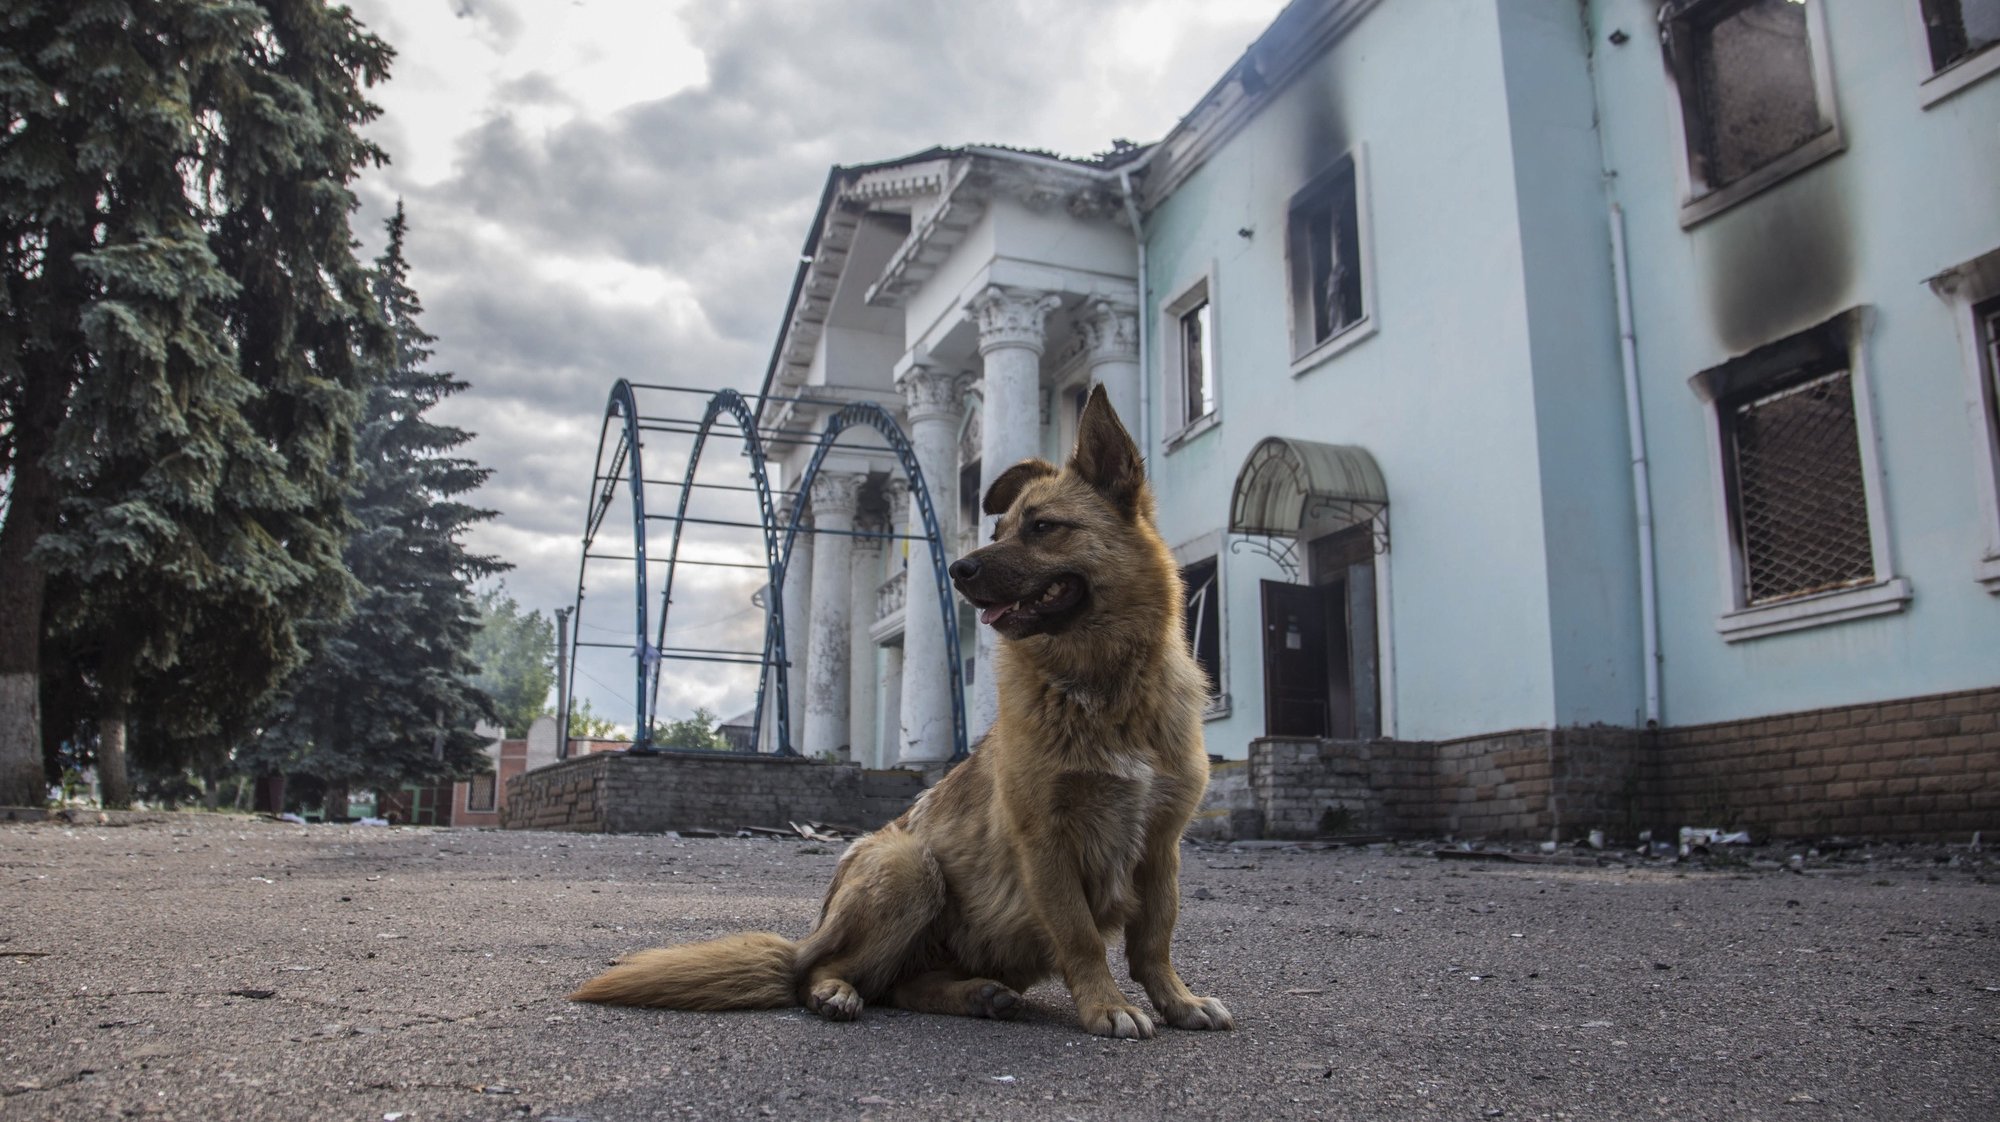 epa10020921 A dog sits near the shelling-hit and burnt-out palace of culture in Lysychansk, Luhansk area, Ukraine, 18 June 2022, five kilometers north-east of Severodonetsk. The city and its surroundings have turned into a battlefield in the past weeks. Russian troops on 24 February had invaded Ukraine, starting a conflict that provoked death, destruction and a humanitarian crisis ever since.  EPA/OLEKSANDR RATUSHNIAK